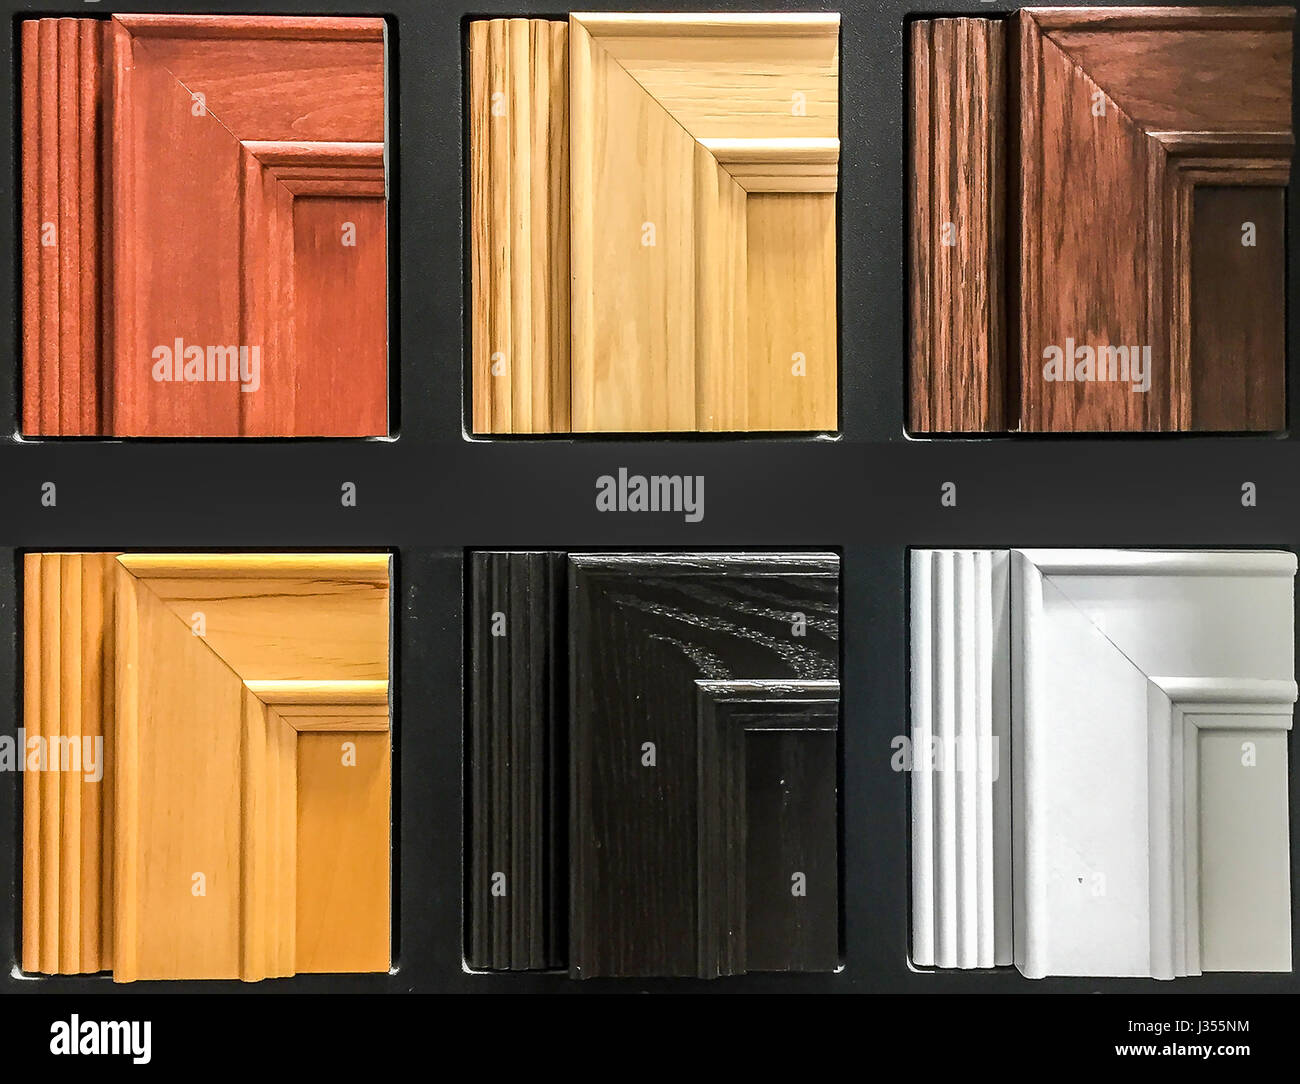 Wooden Entry Or Kitchen Cabinet Door Color And Profile Samples